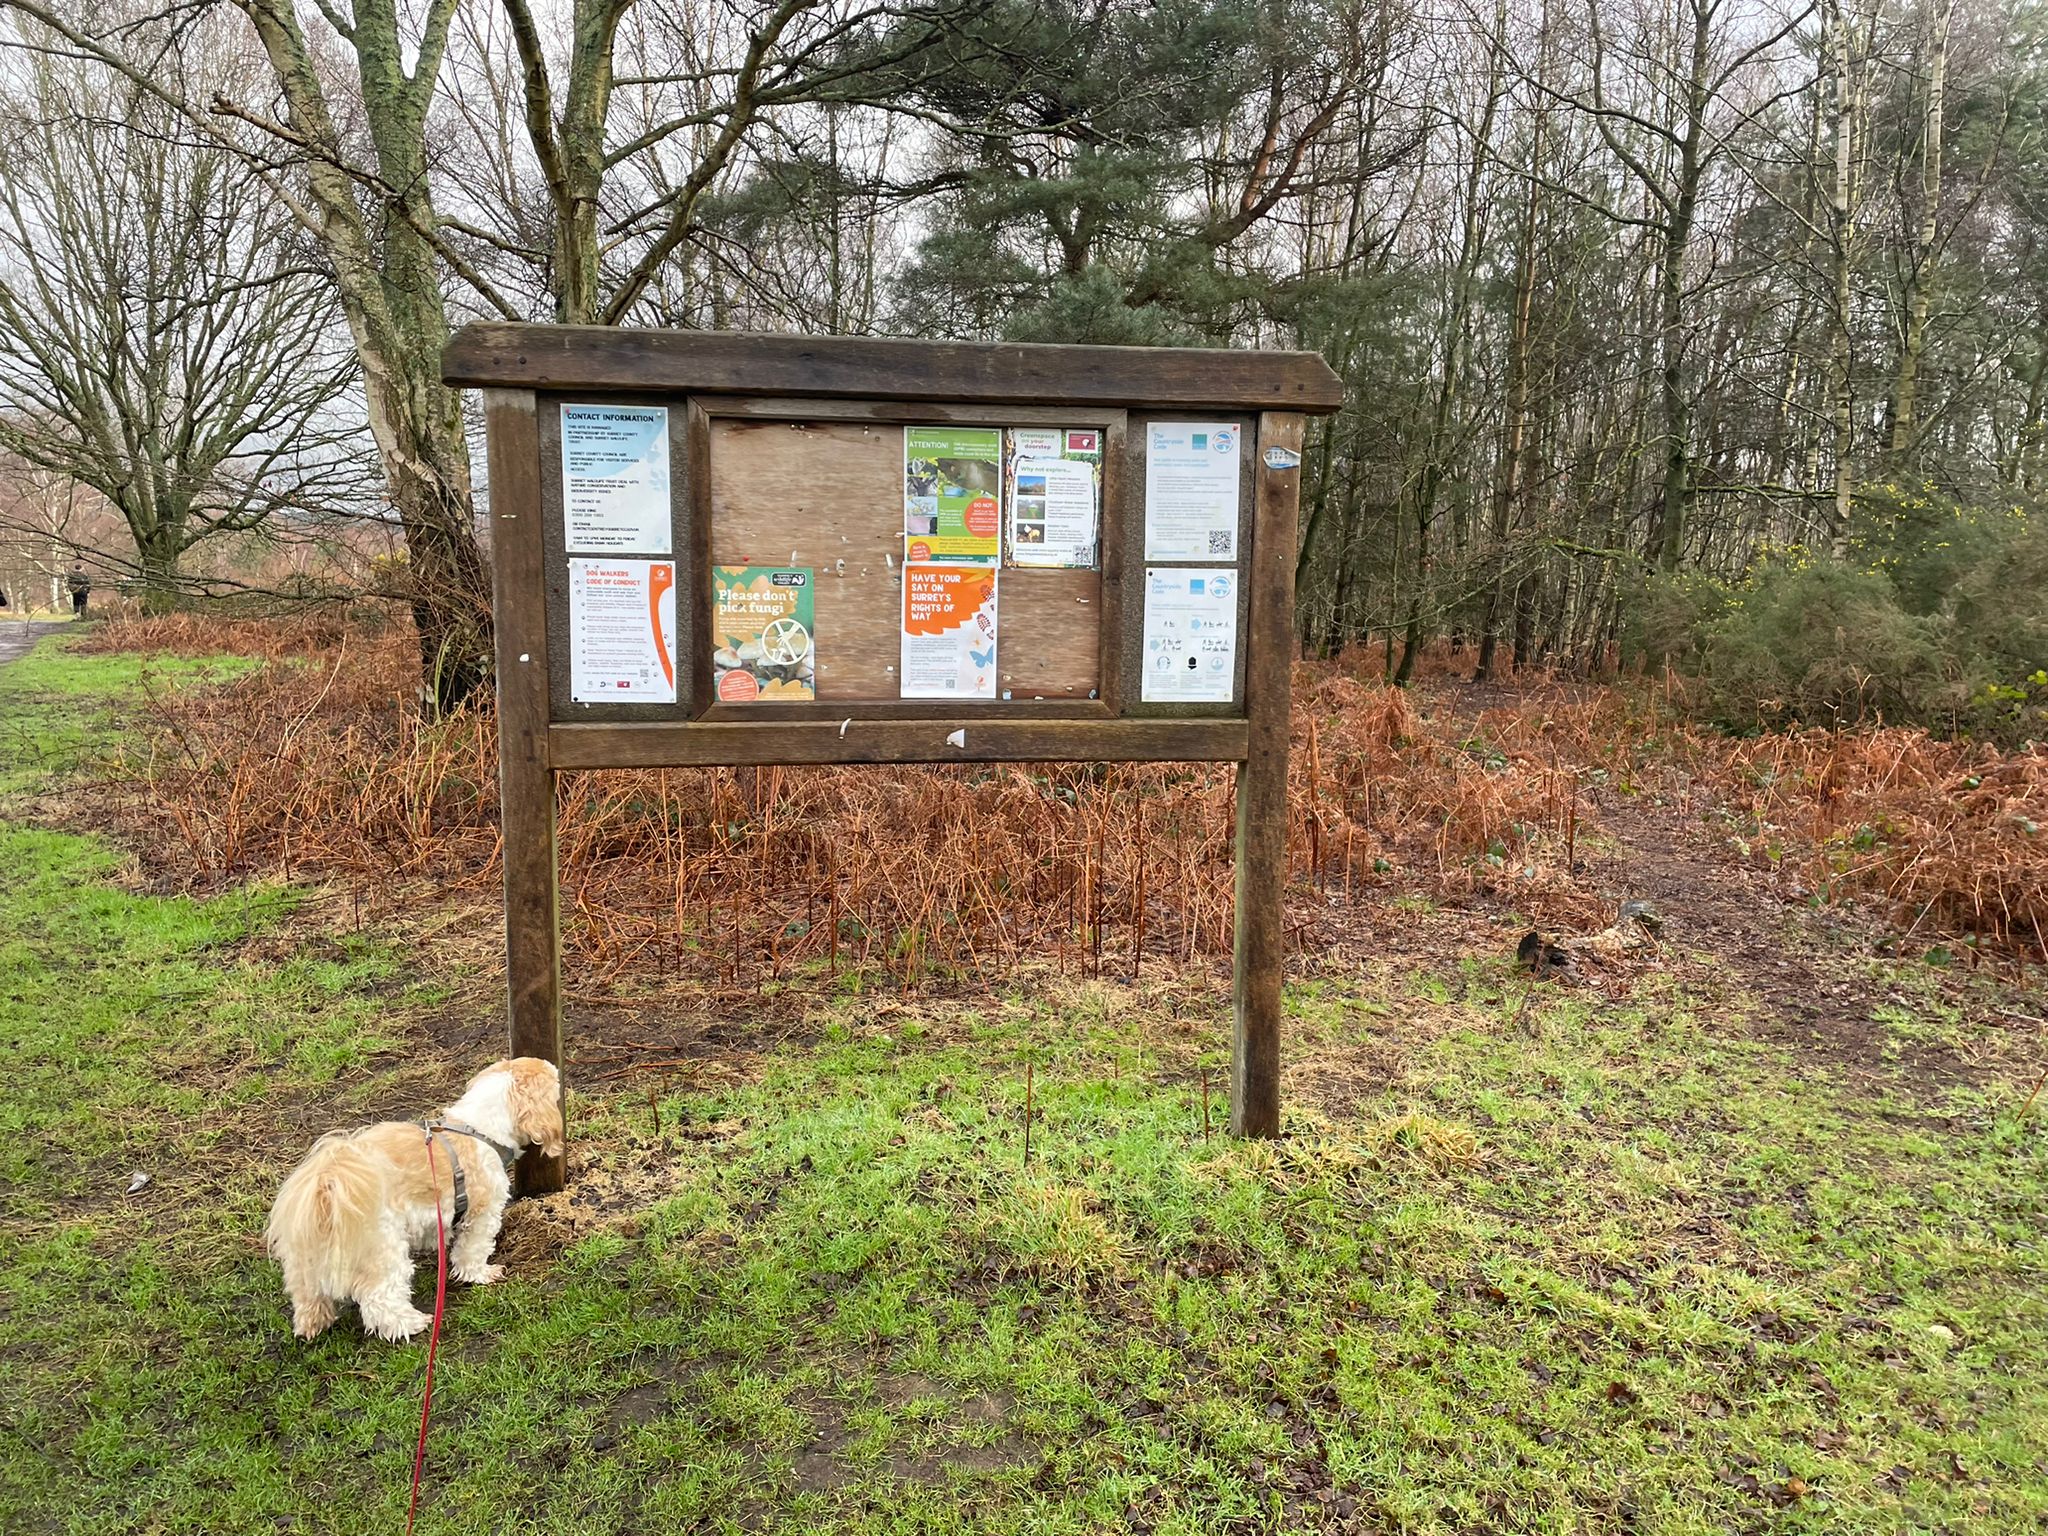 A small beige and white dog standing at the base of a wooden noticeboard containing colourful posters. With a background heathland setting